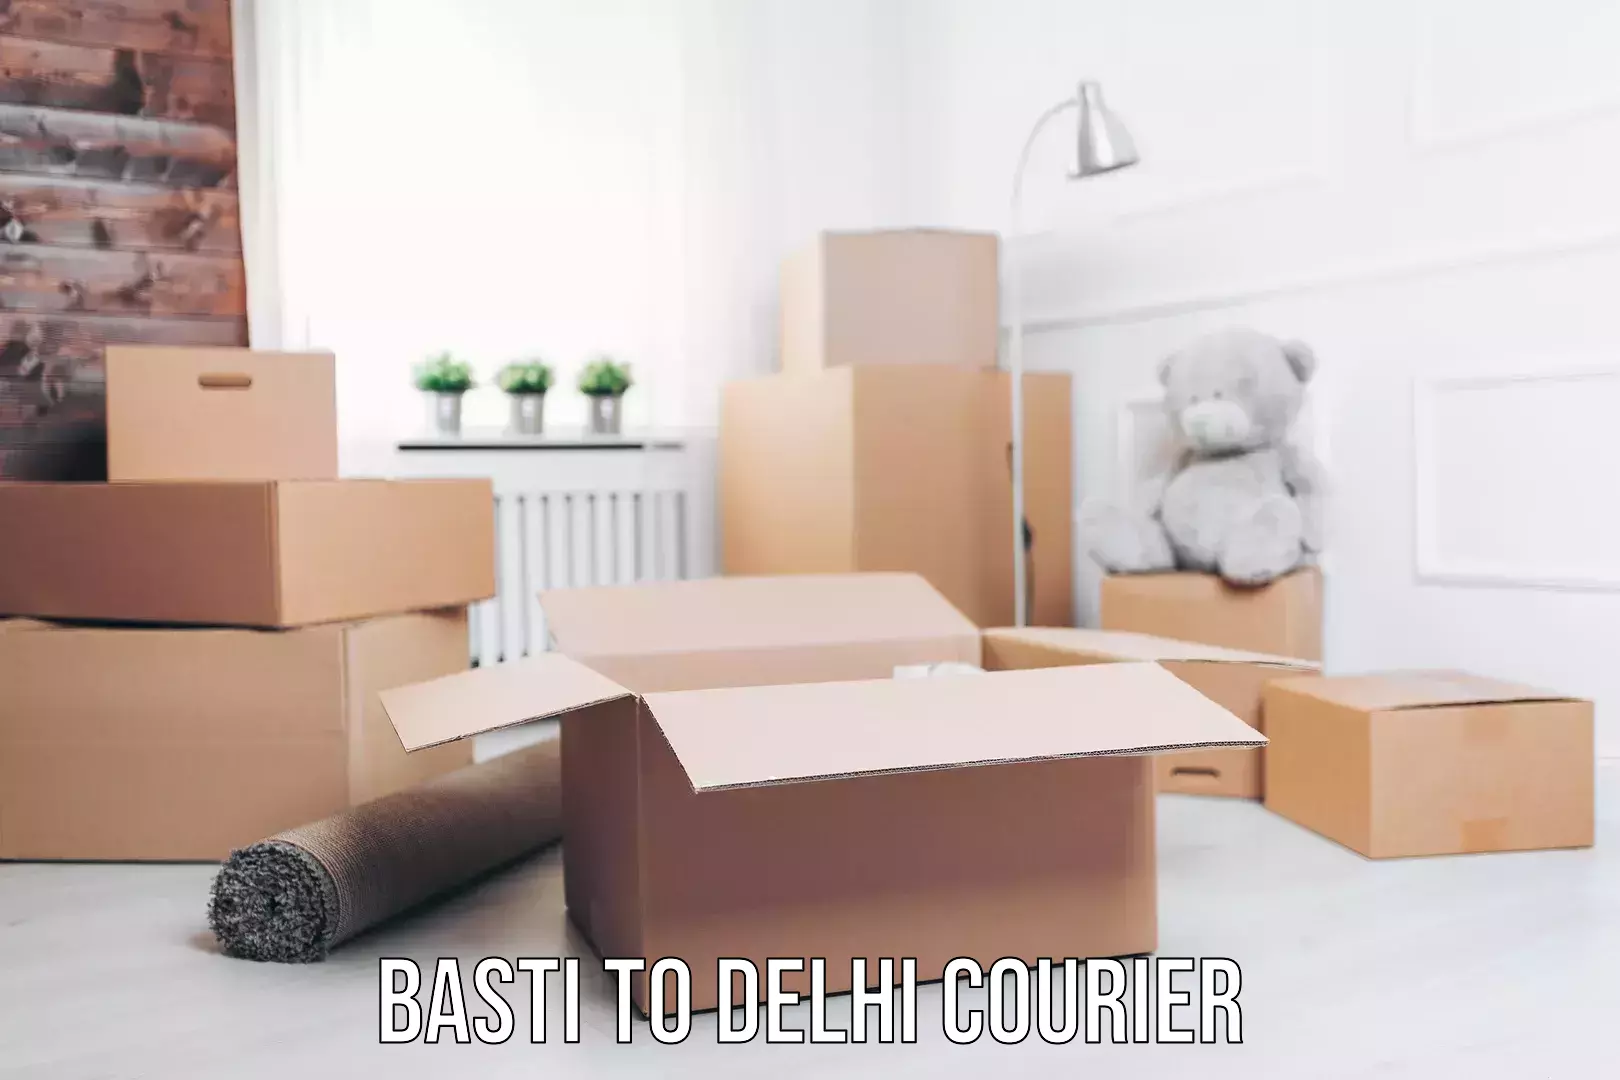 Quality courier partnerships Basti to NCR